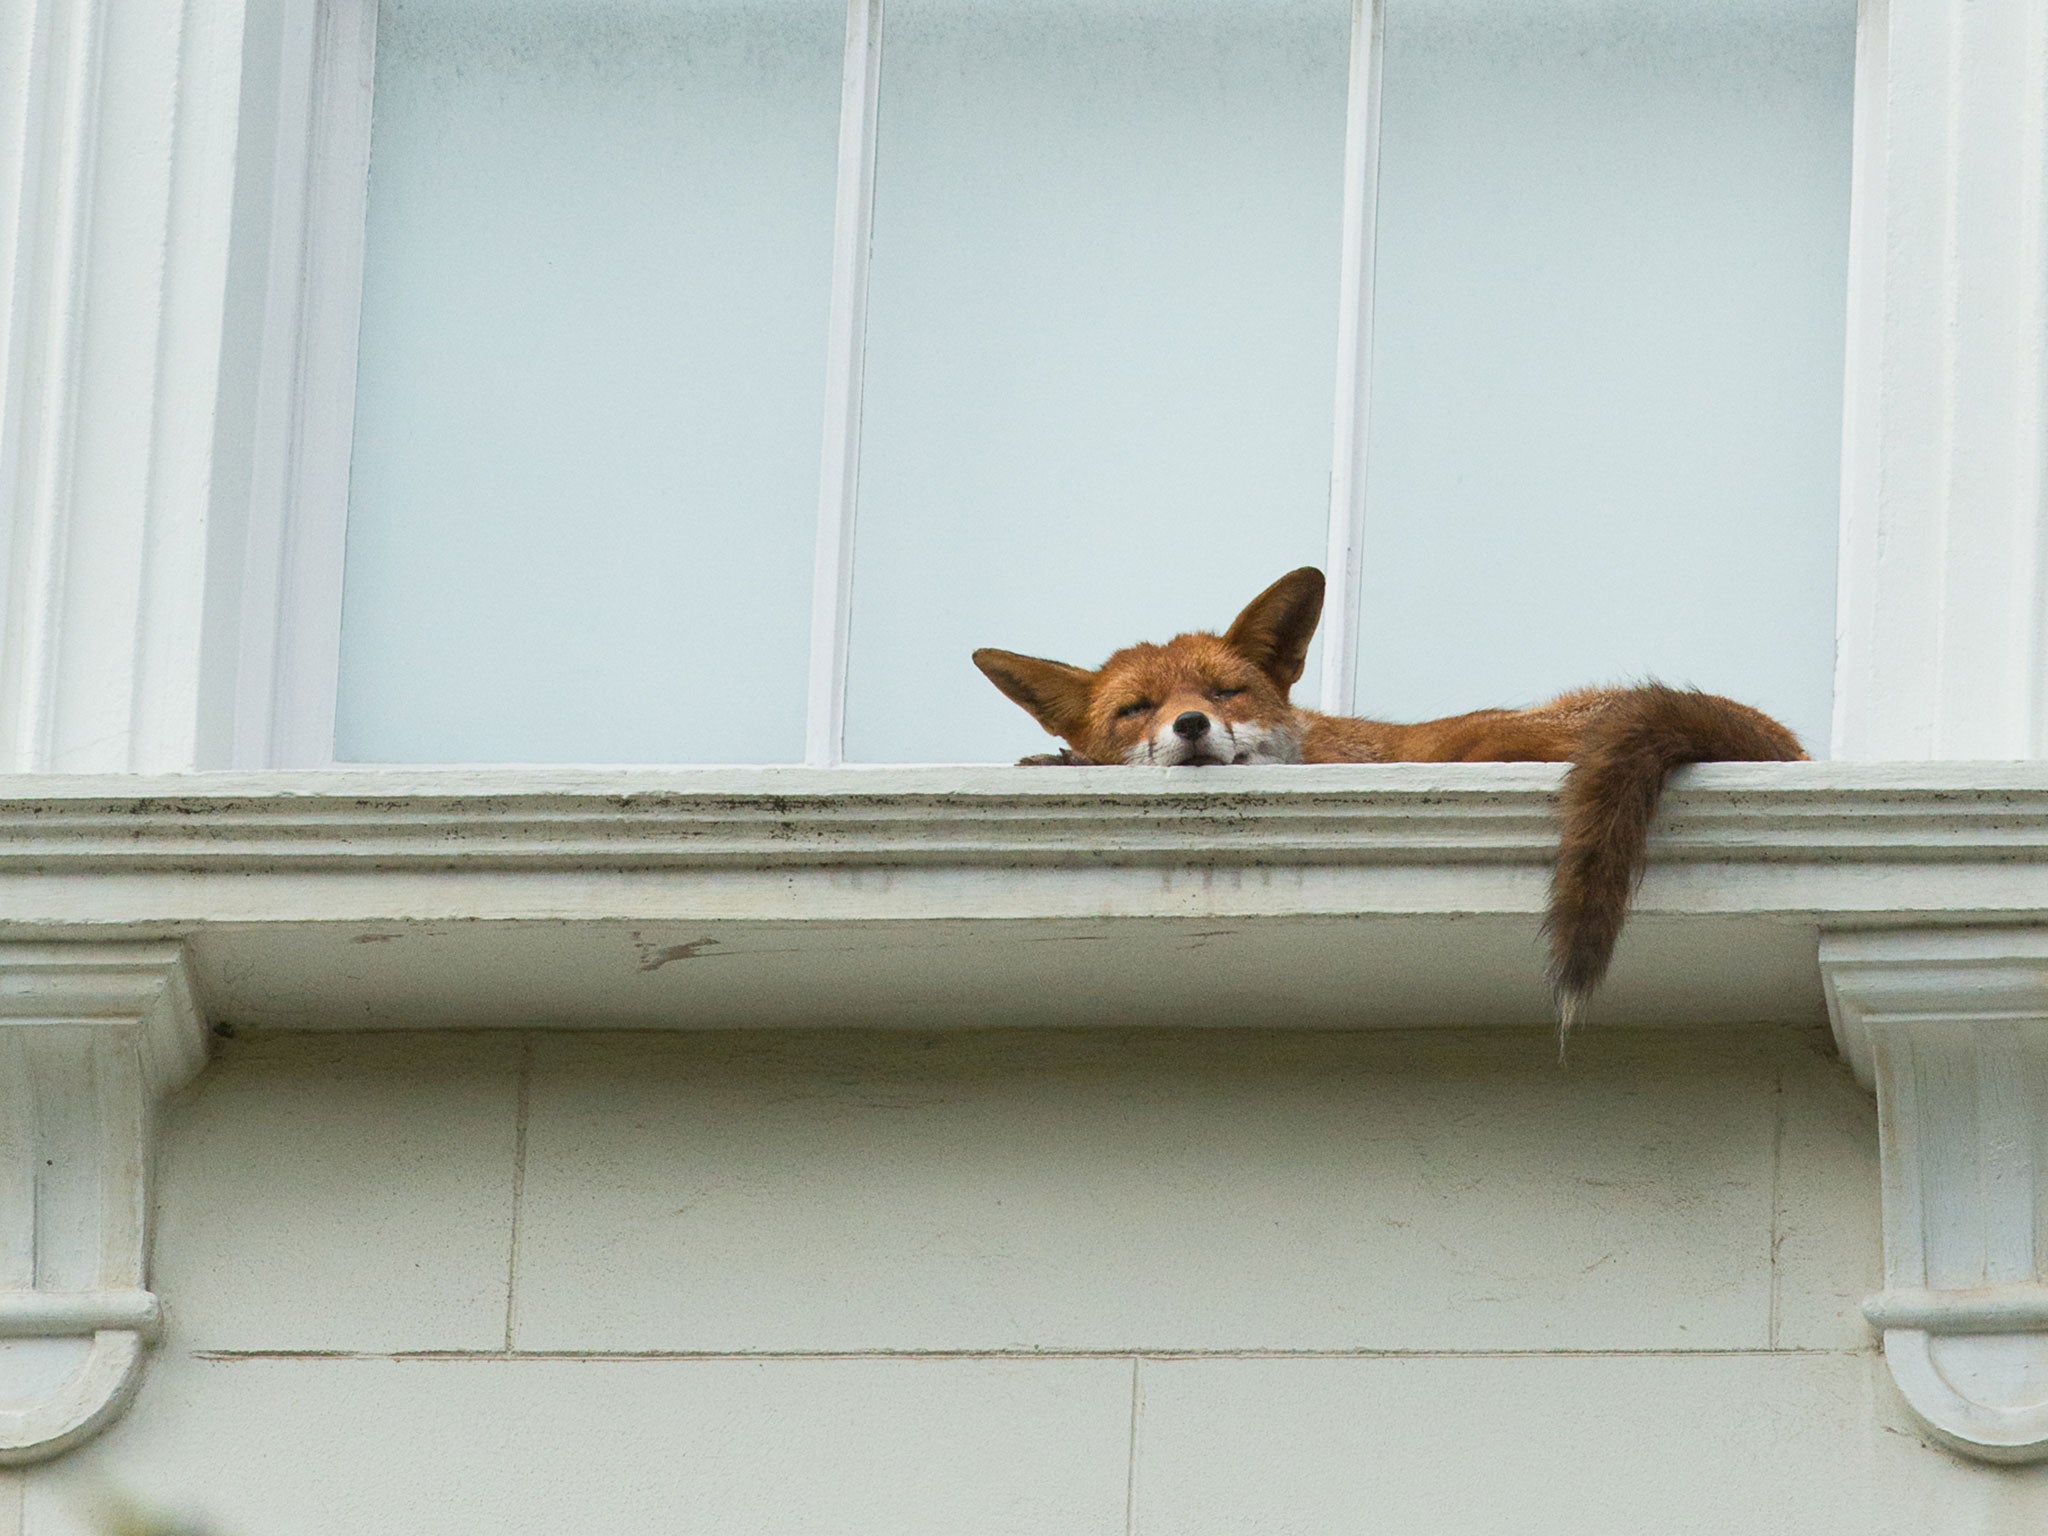 How did it get there? Fox spotted napping on second-floor window sill in Notting Hill ...2048 x 1536